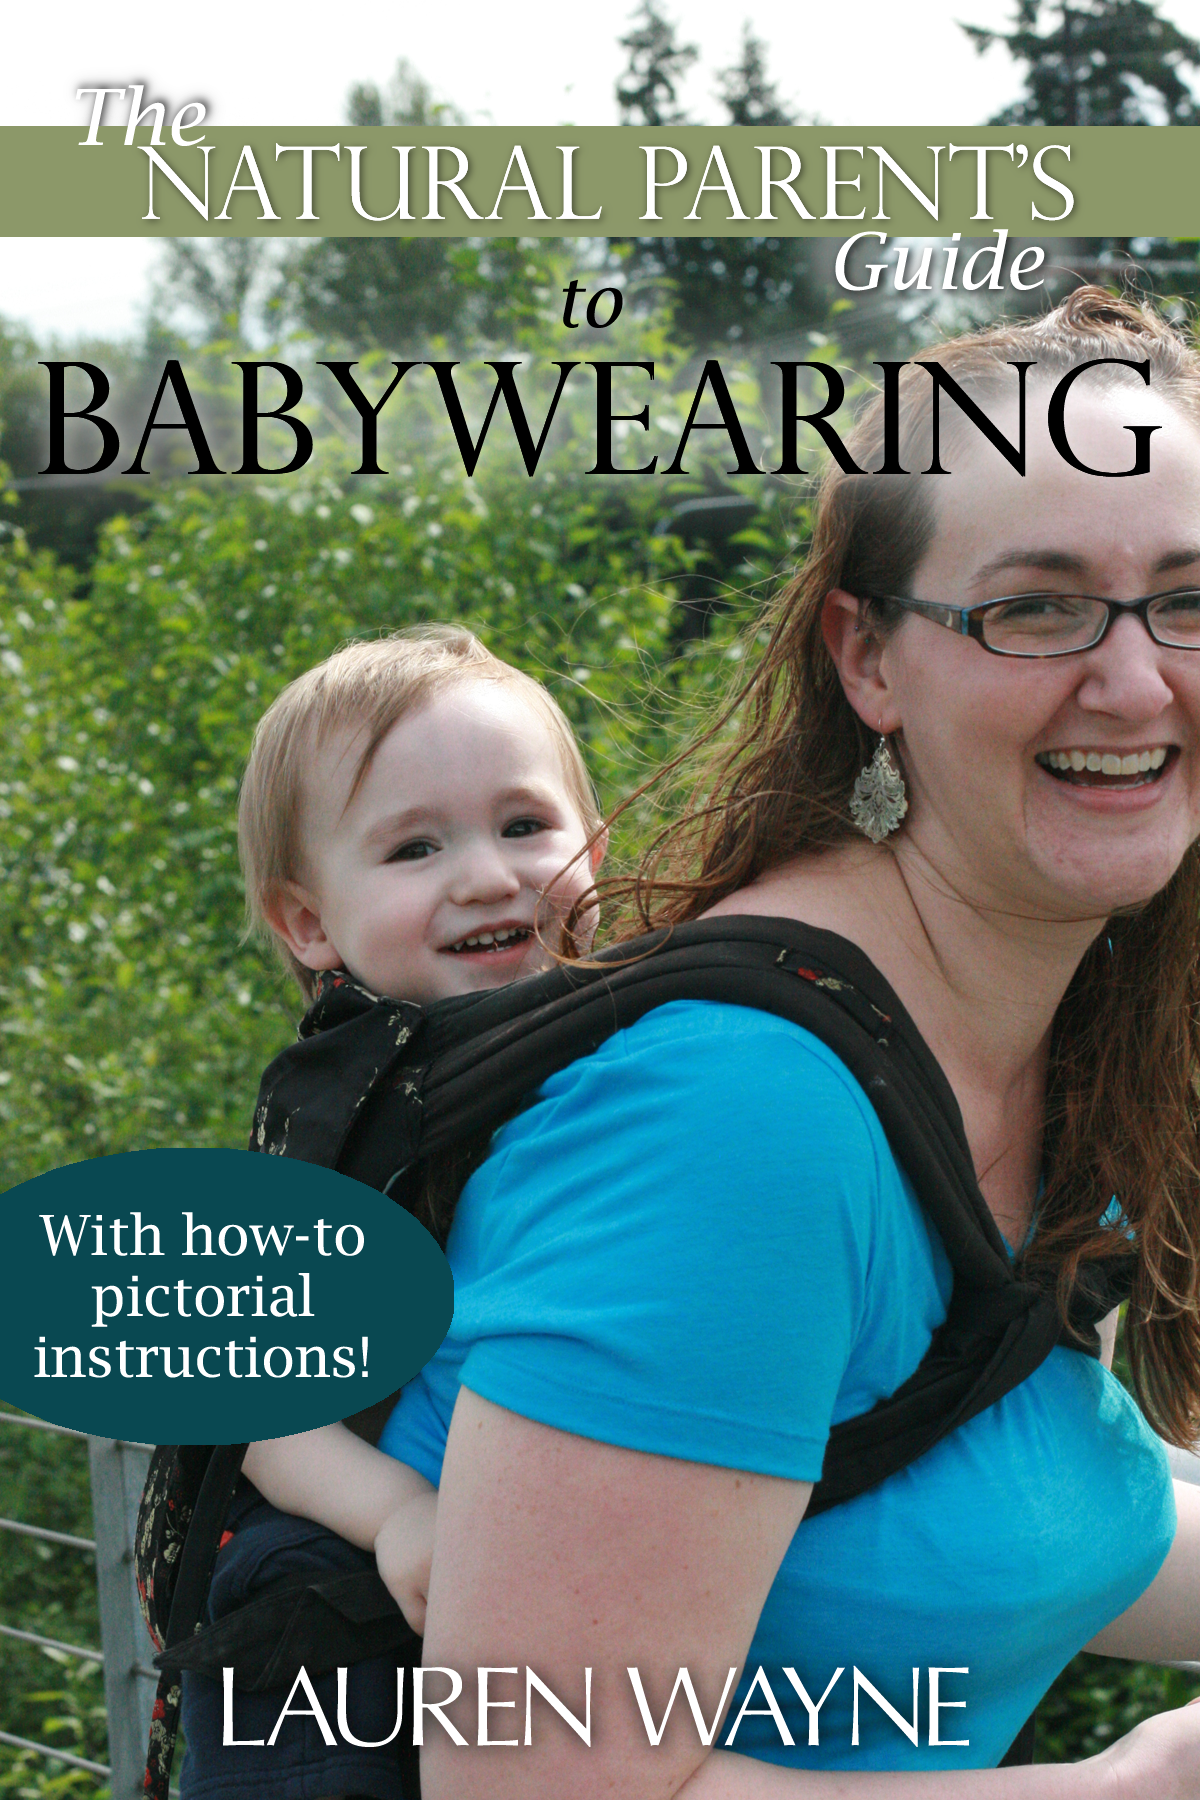 The Natural Parent's Guide to Babywearing